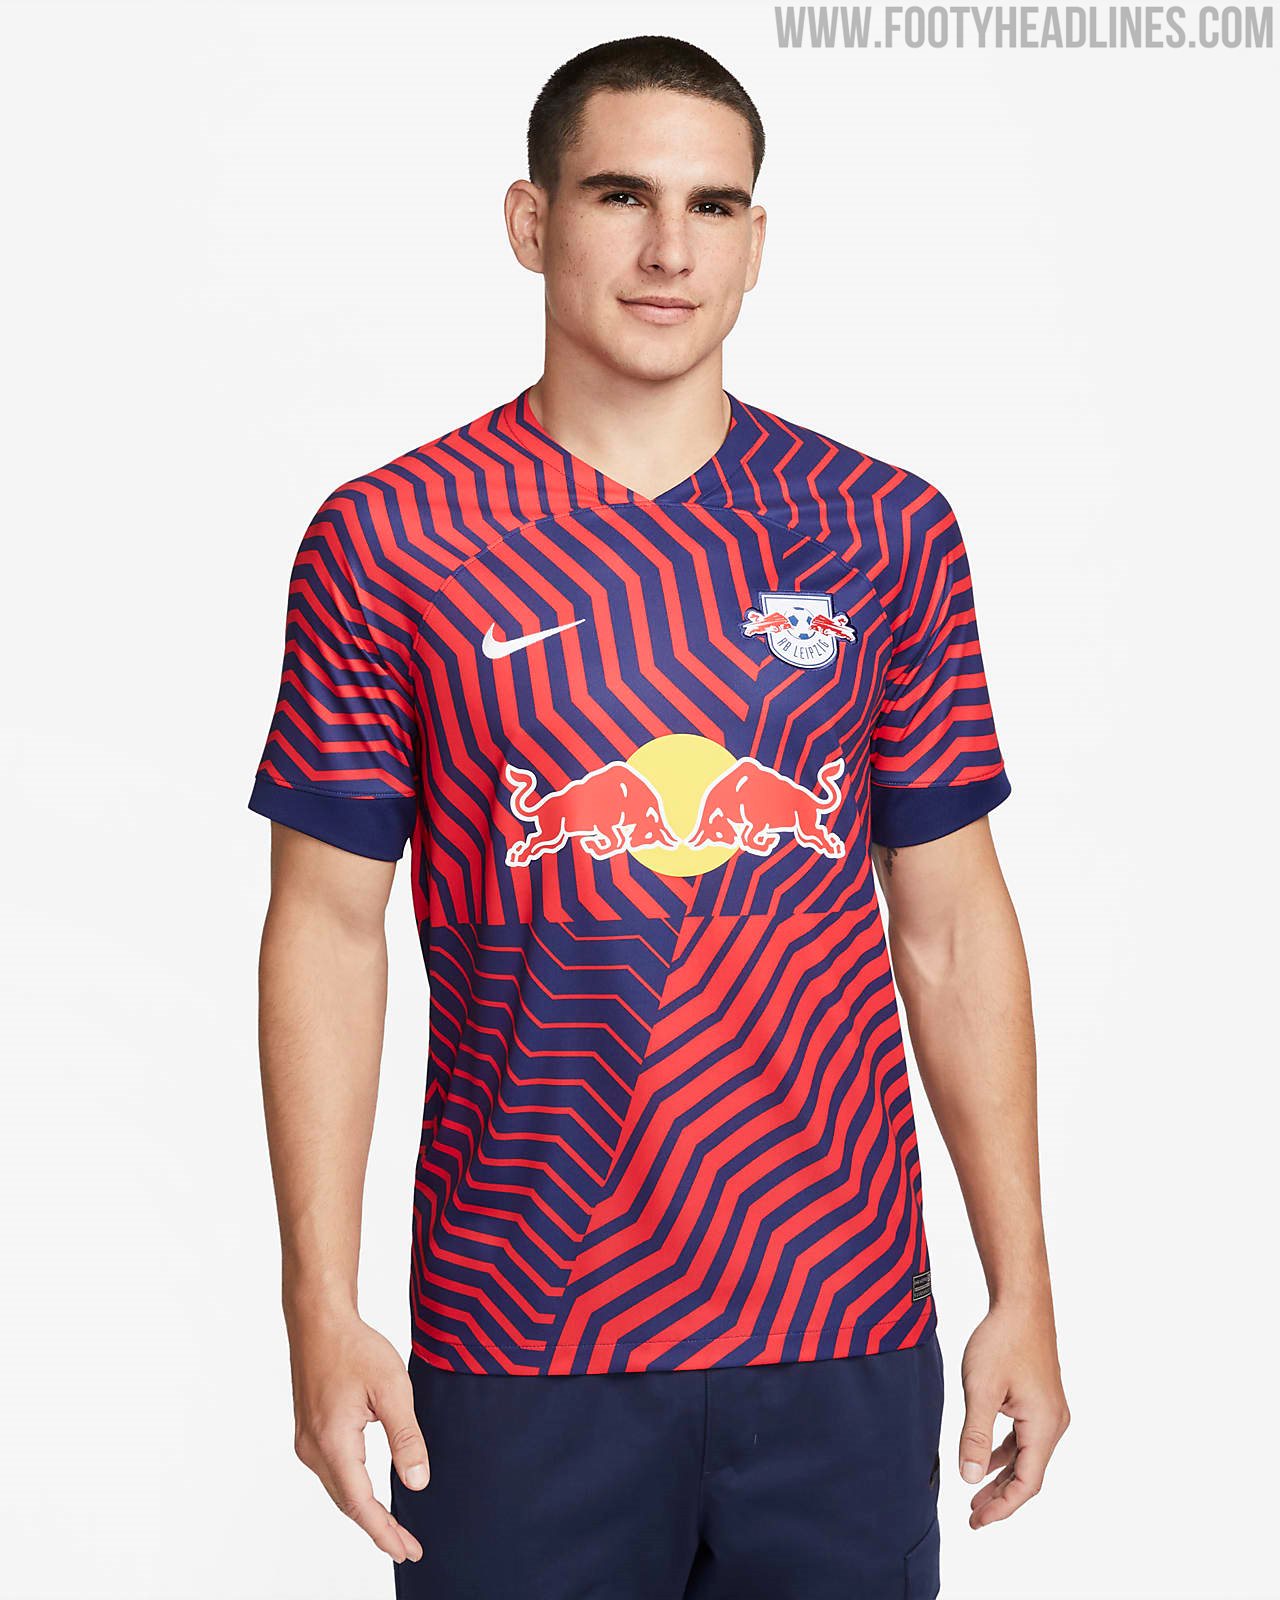 RB Leipzig Launch 23/24 Home Shirt From Nike - SoccerBible